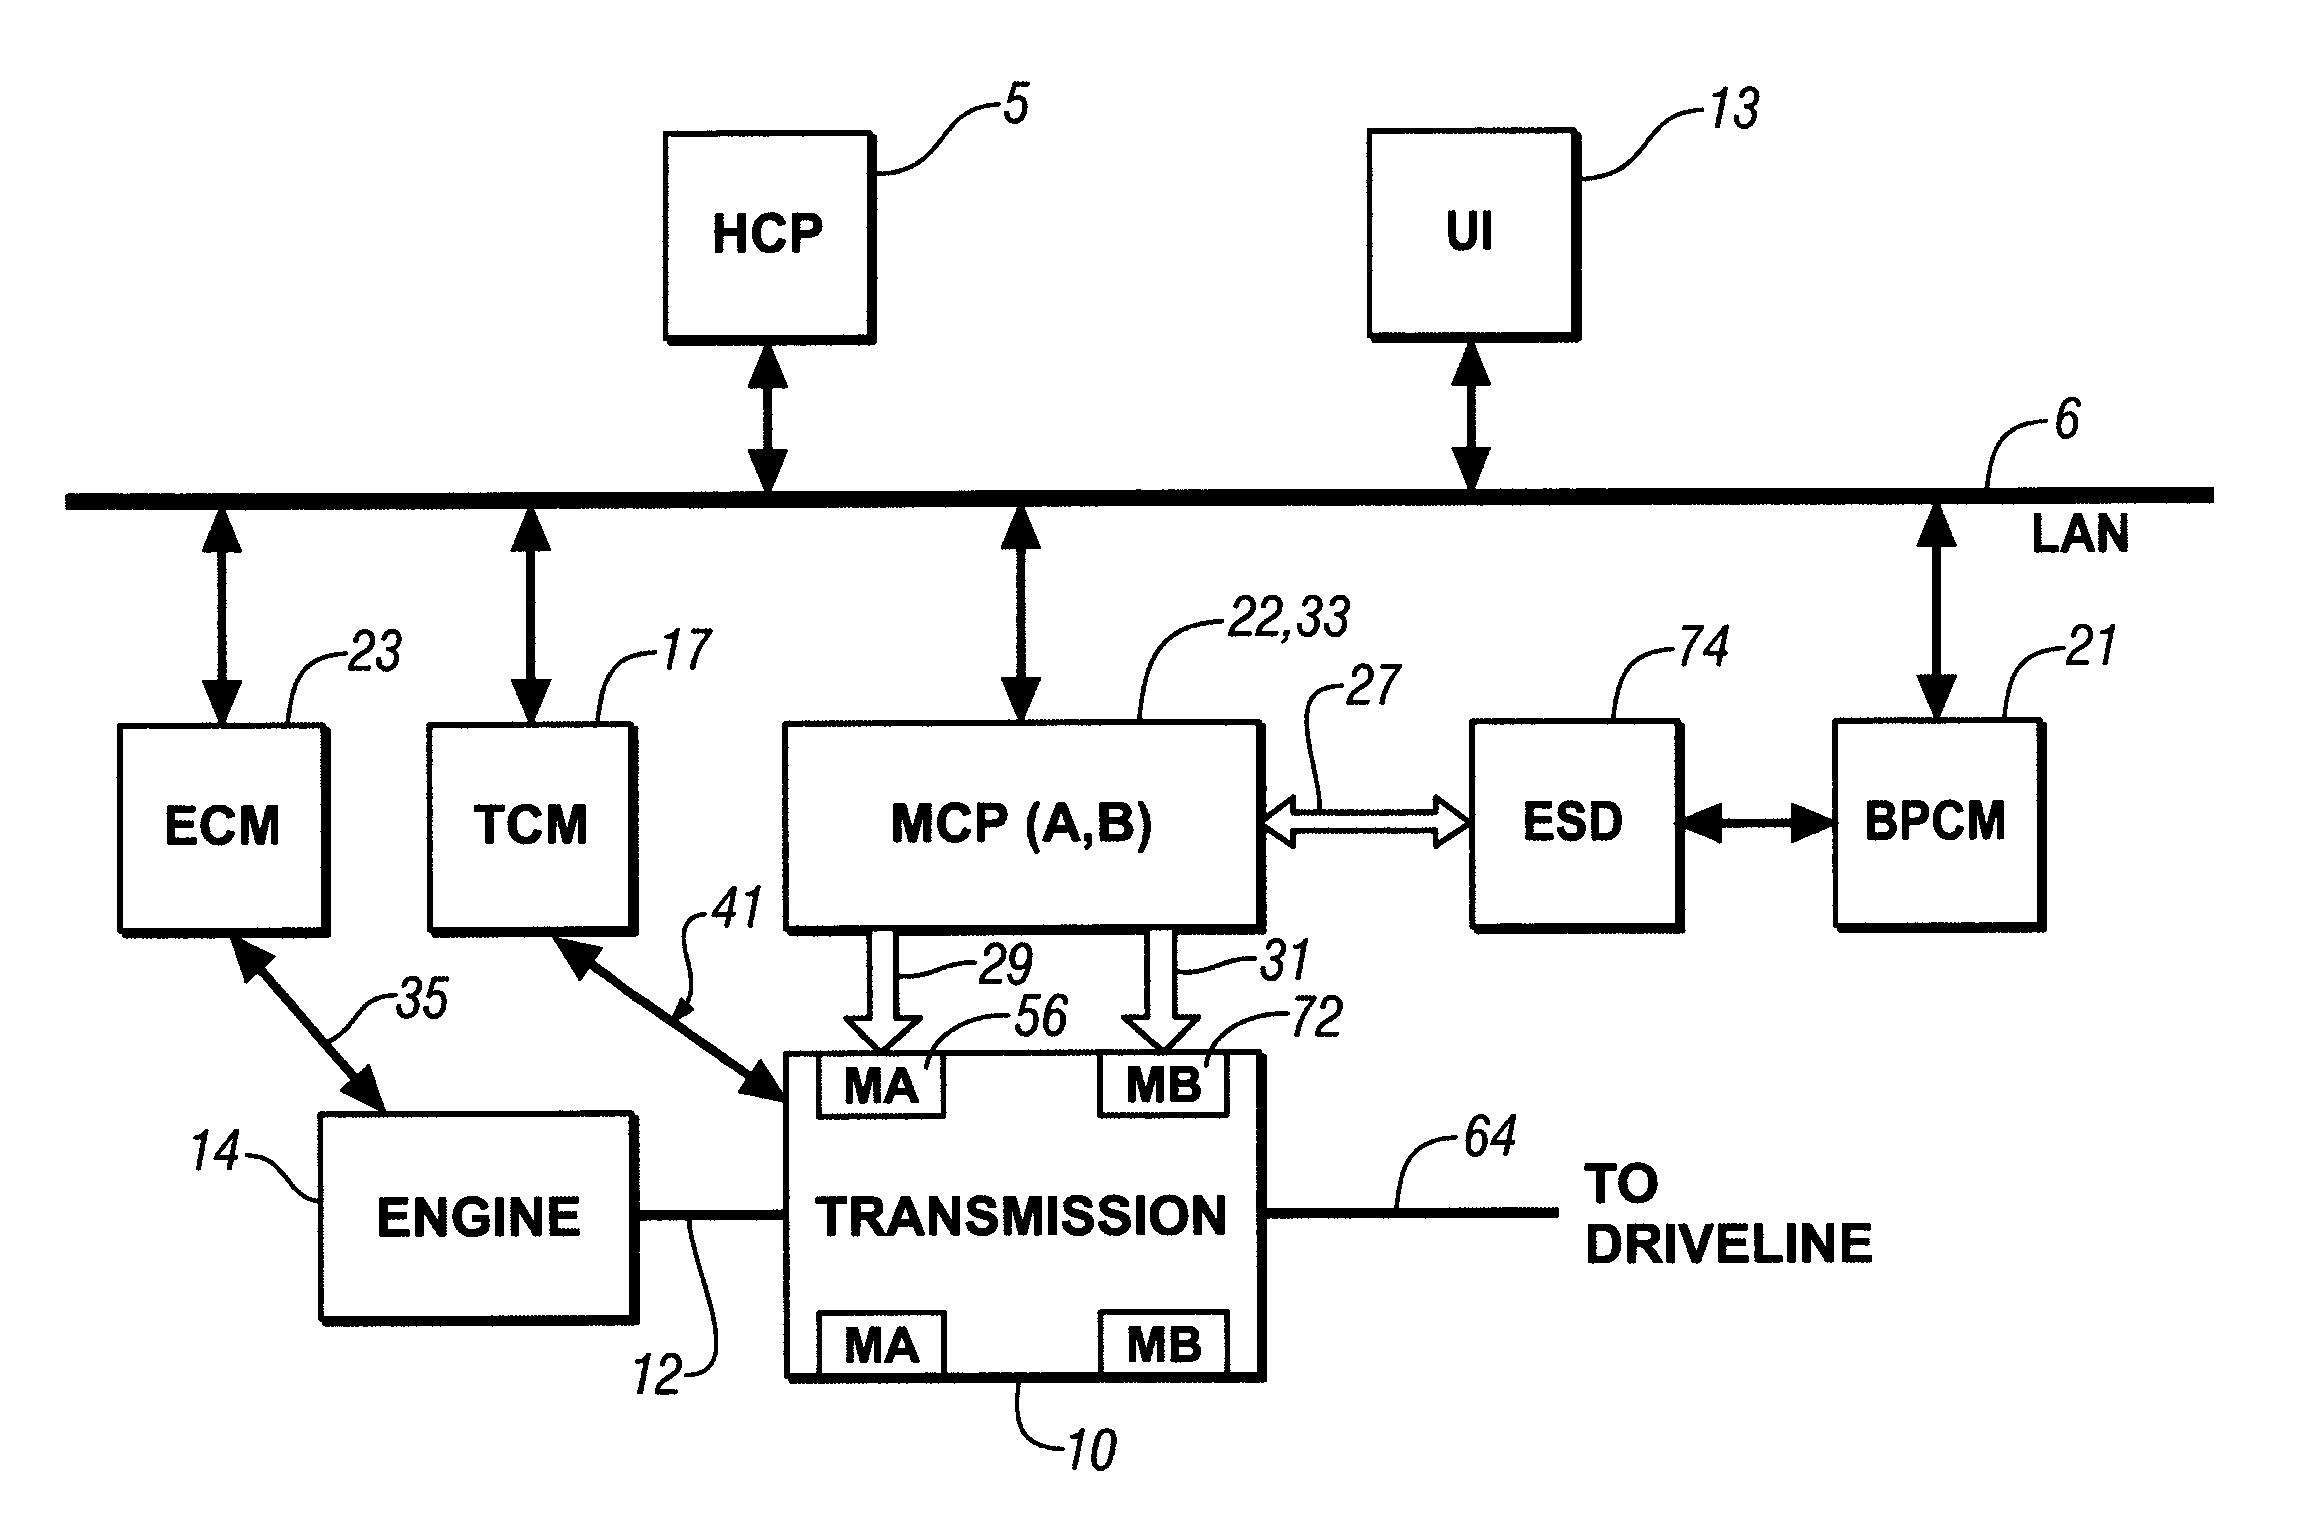 Control system architecture for a hybrid powertrain